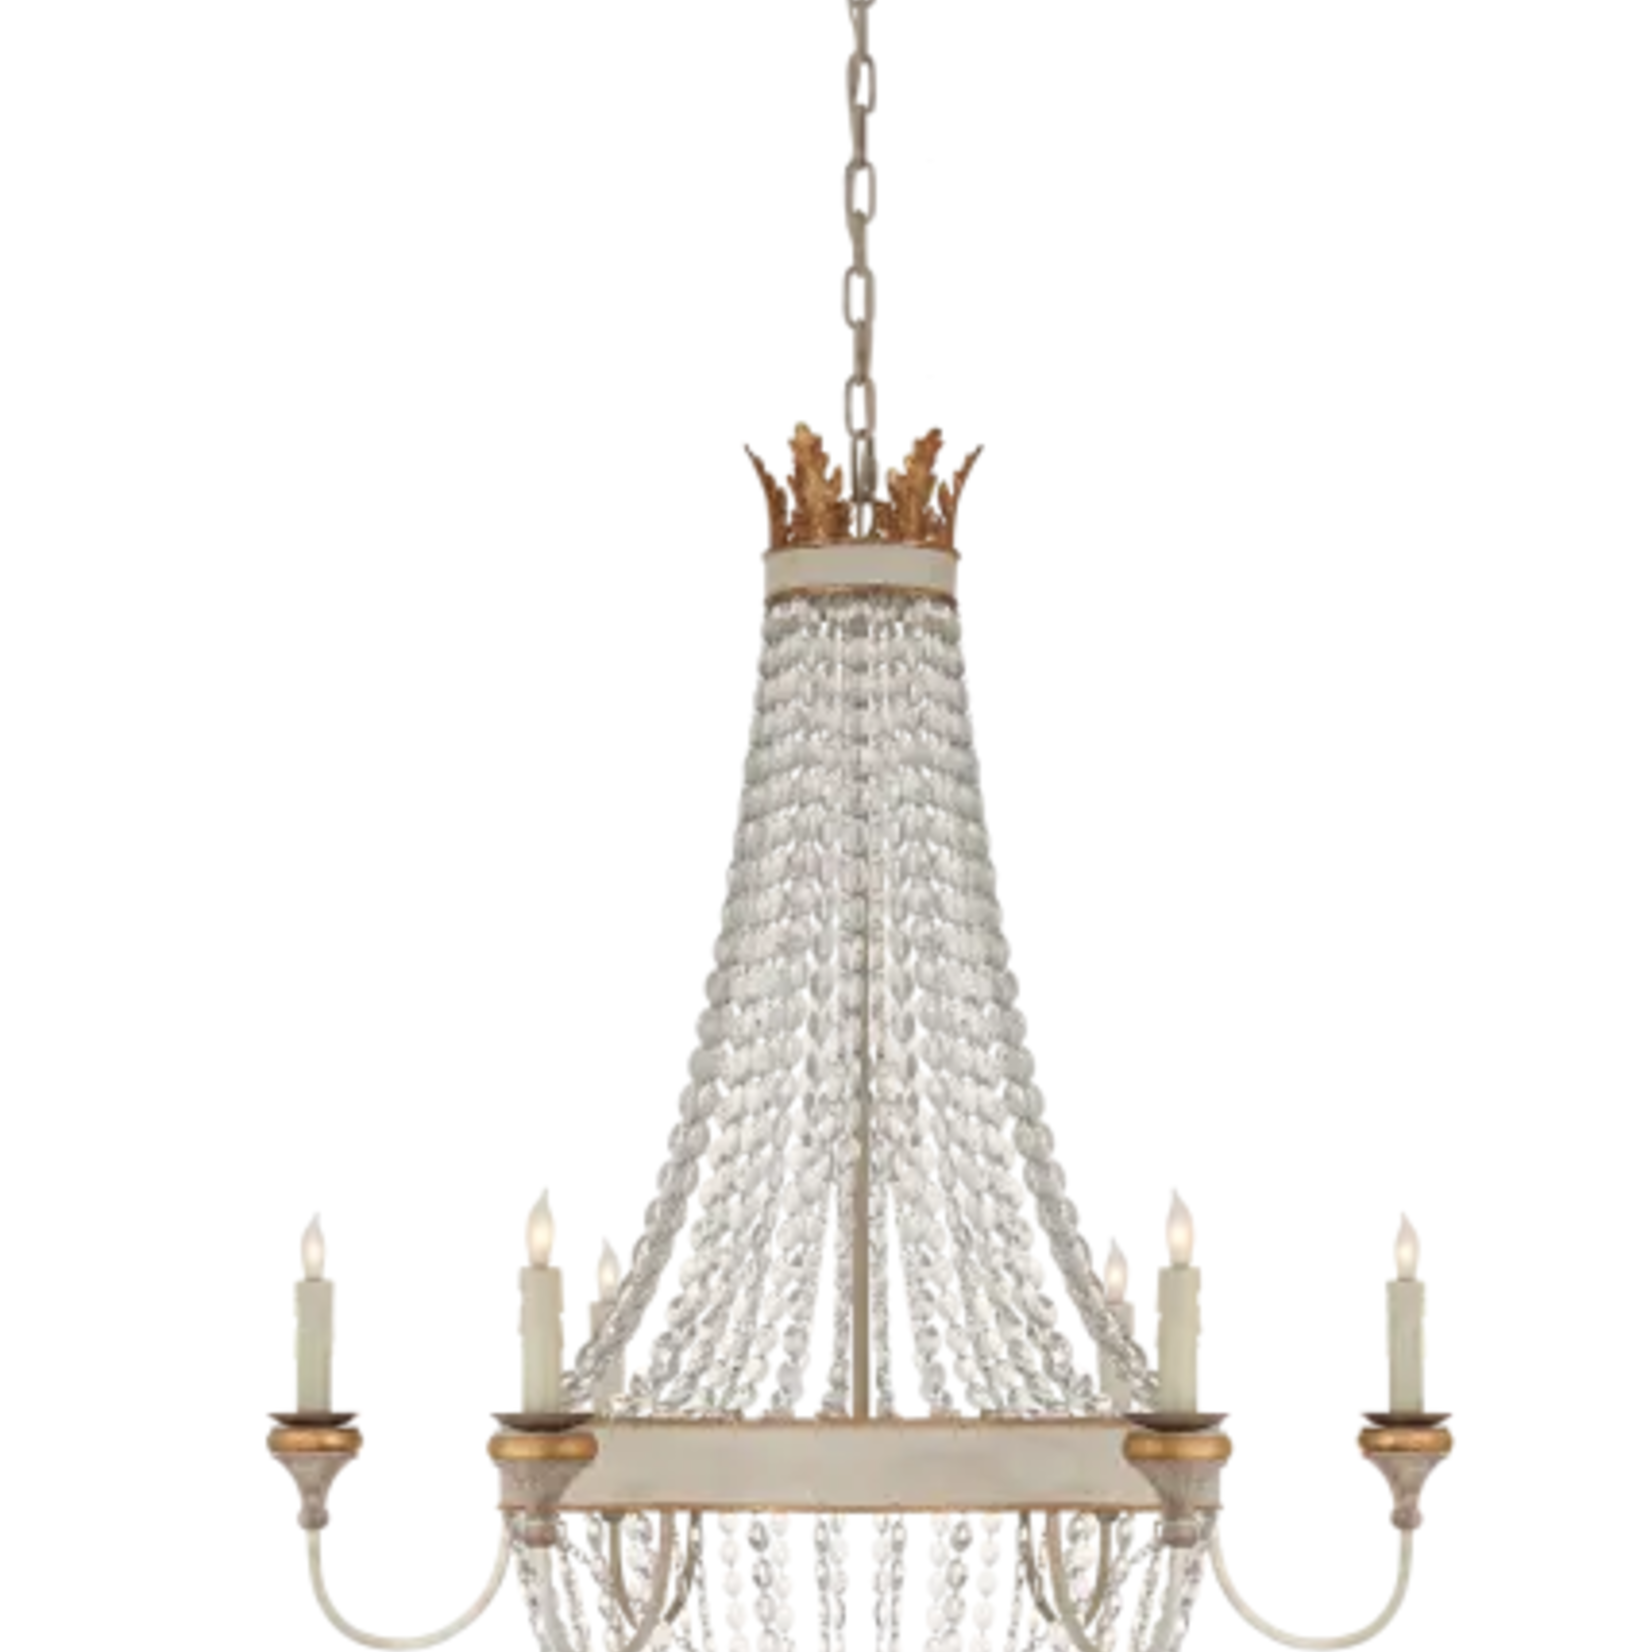 Entellina Chandelier in Vintage White and Gild with Crystal